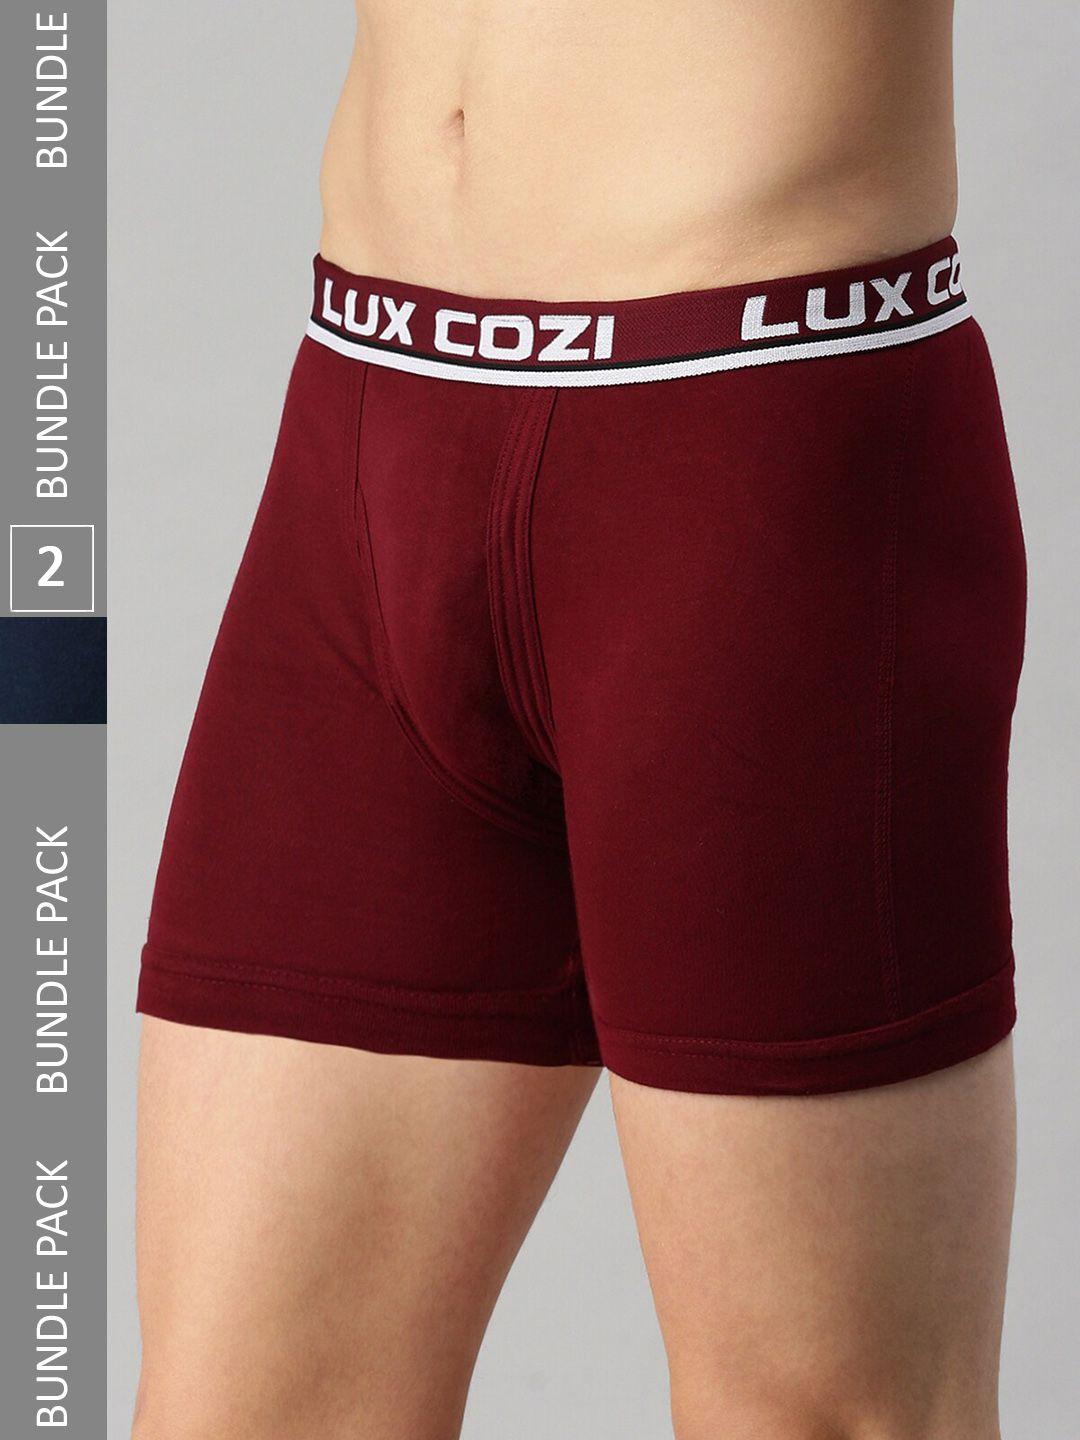 lux-cozi-pack-of-2-outer-elastic-trunks